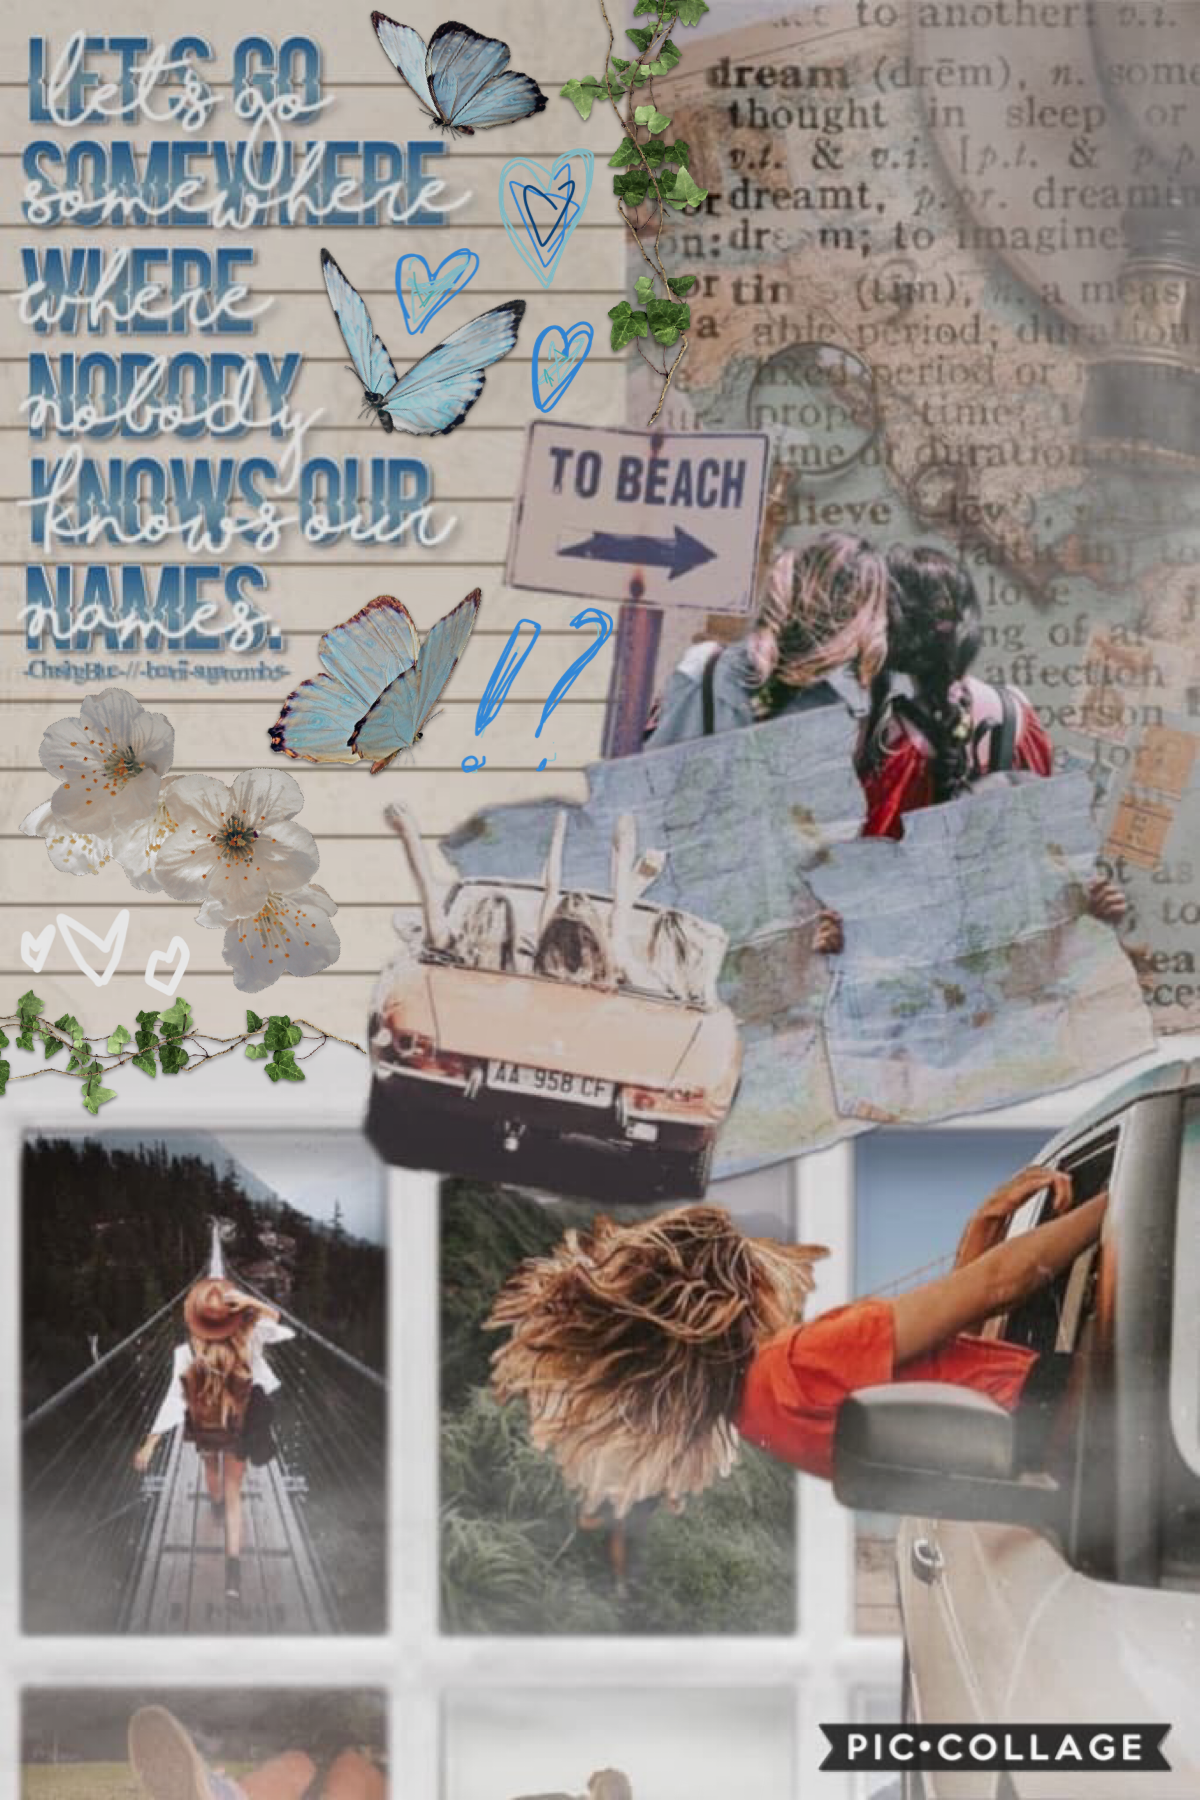 💖19/dec./2021💖-tap-
I collabed with the amazing n talented collager -ChasingBlue-!! Creating this wonderful wanderlust collage with -ChasingBlue- was absolutely a fantastic experience! I did the bg and -ChasingBlue- stunningly did the beautiful blue text!